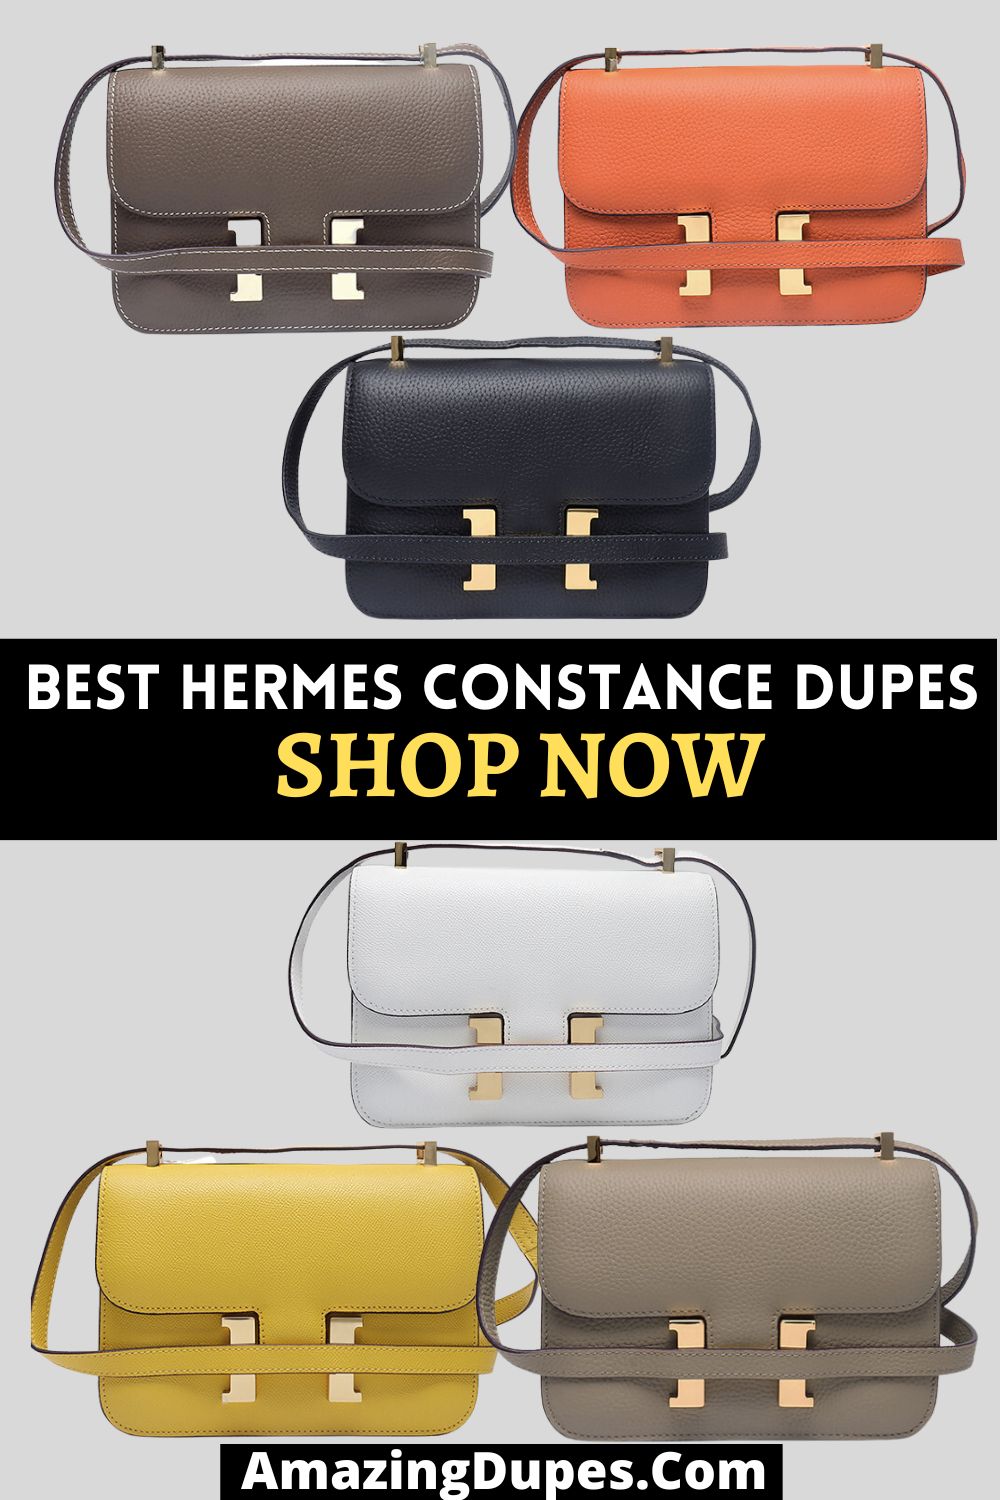 The Best Hermes Constance Dupe Bags for Cheap, Designer Dupe Handbags ...